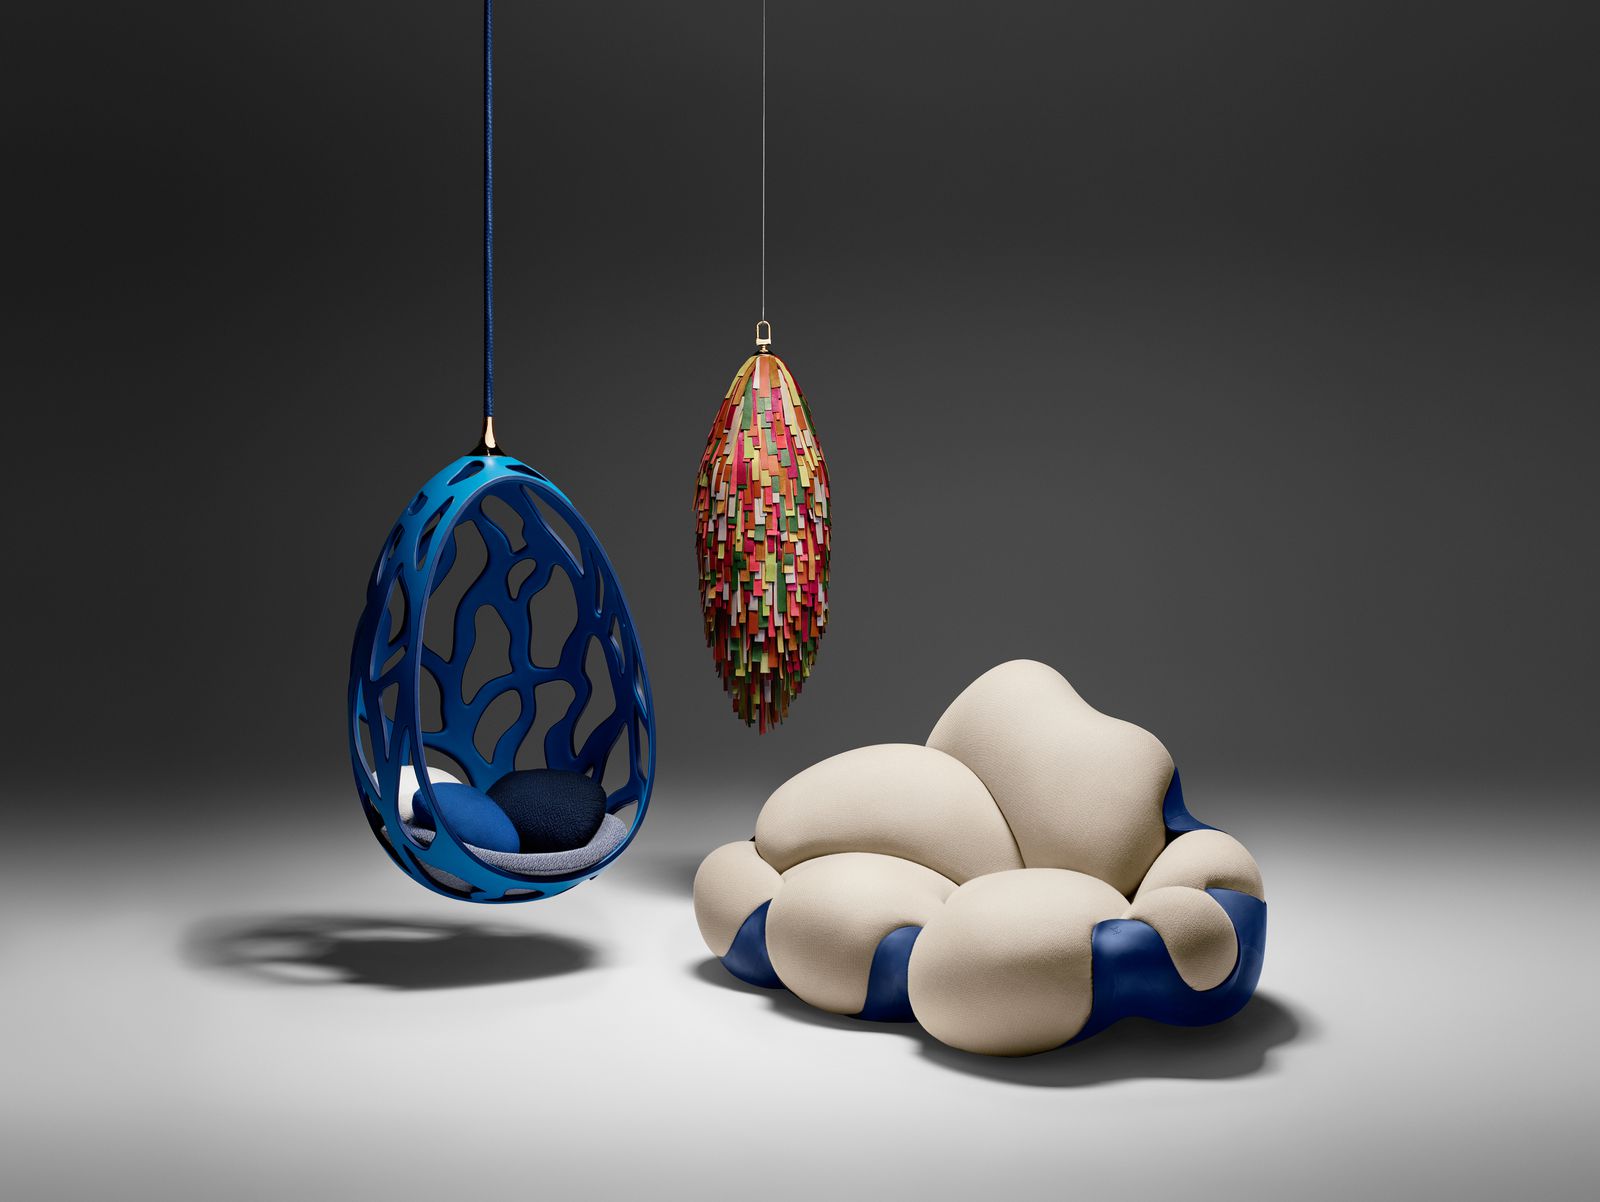 Discover Louis Vuitton Objets Nomades collection at Design Miami